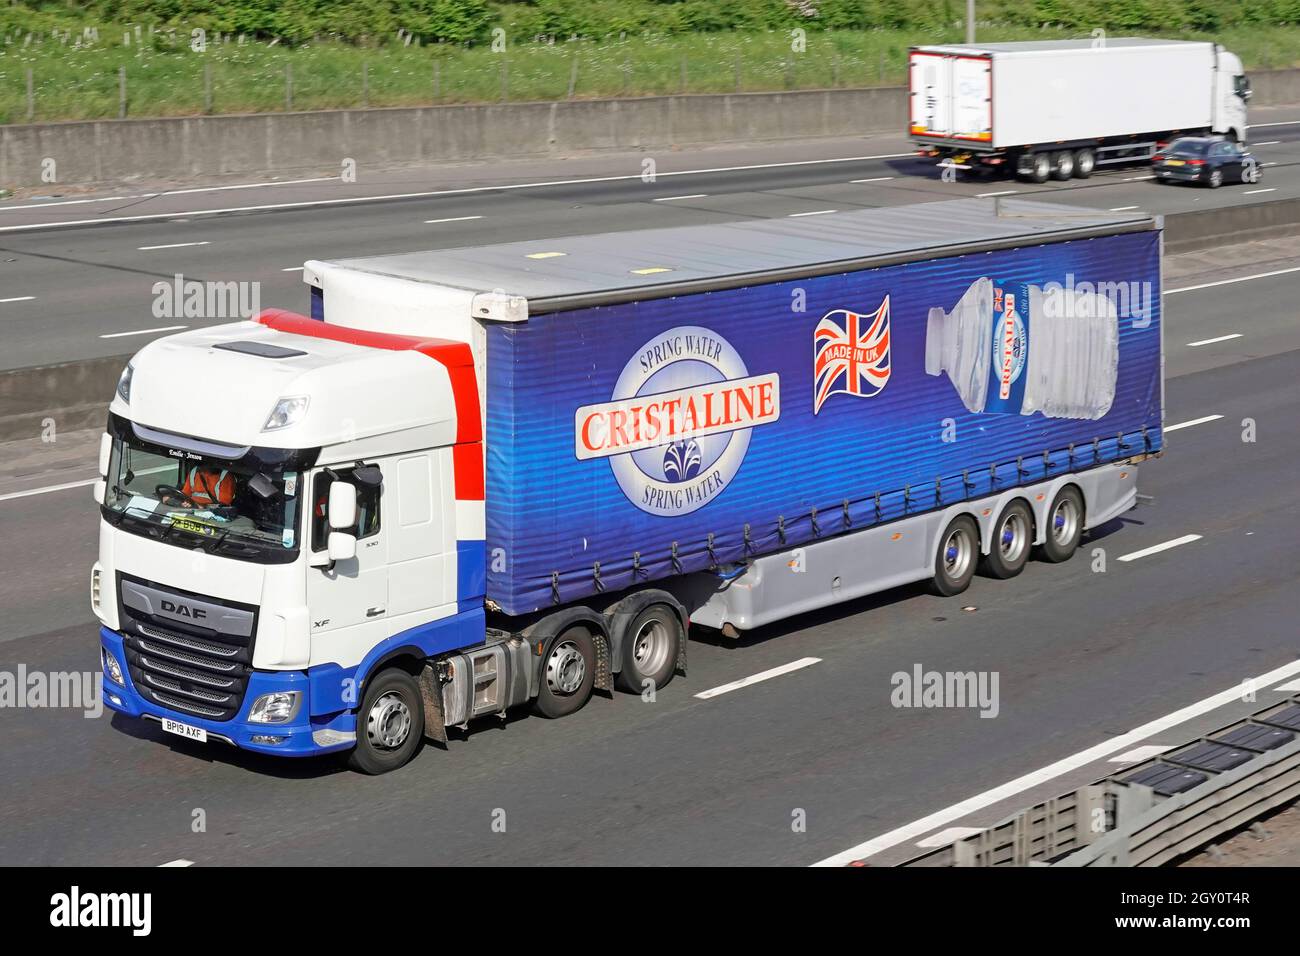 Front & side view white Daf lorry truck & blue Cristaline bottled Spring Water a French business advertising on soft curtain trailer on UK motorway Stock Photo